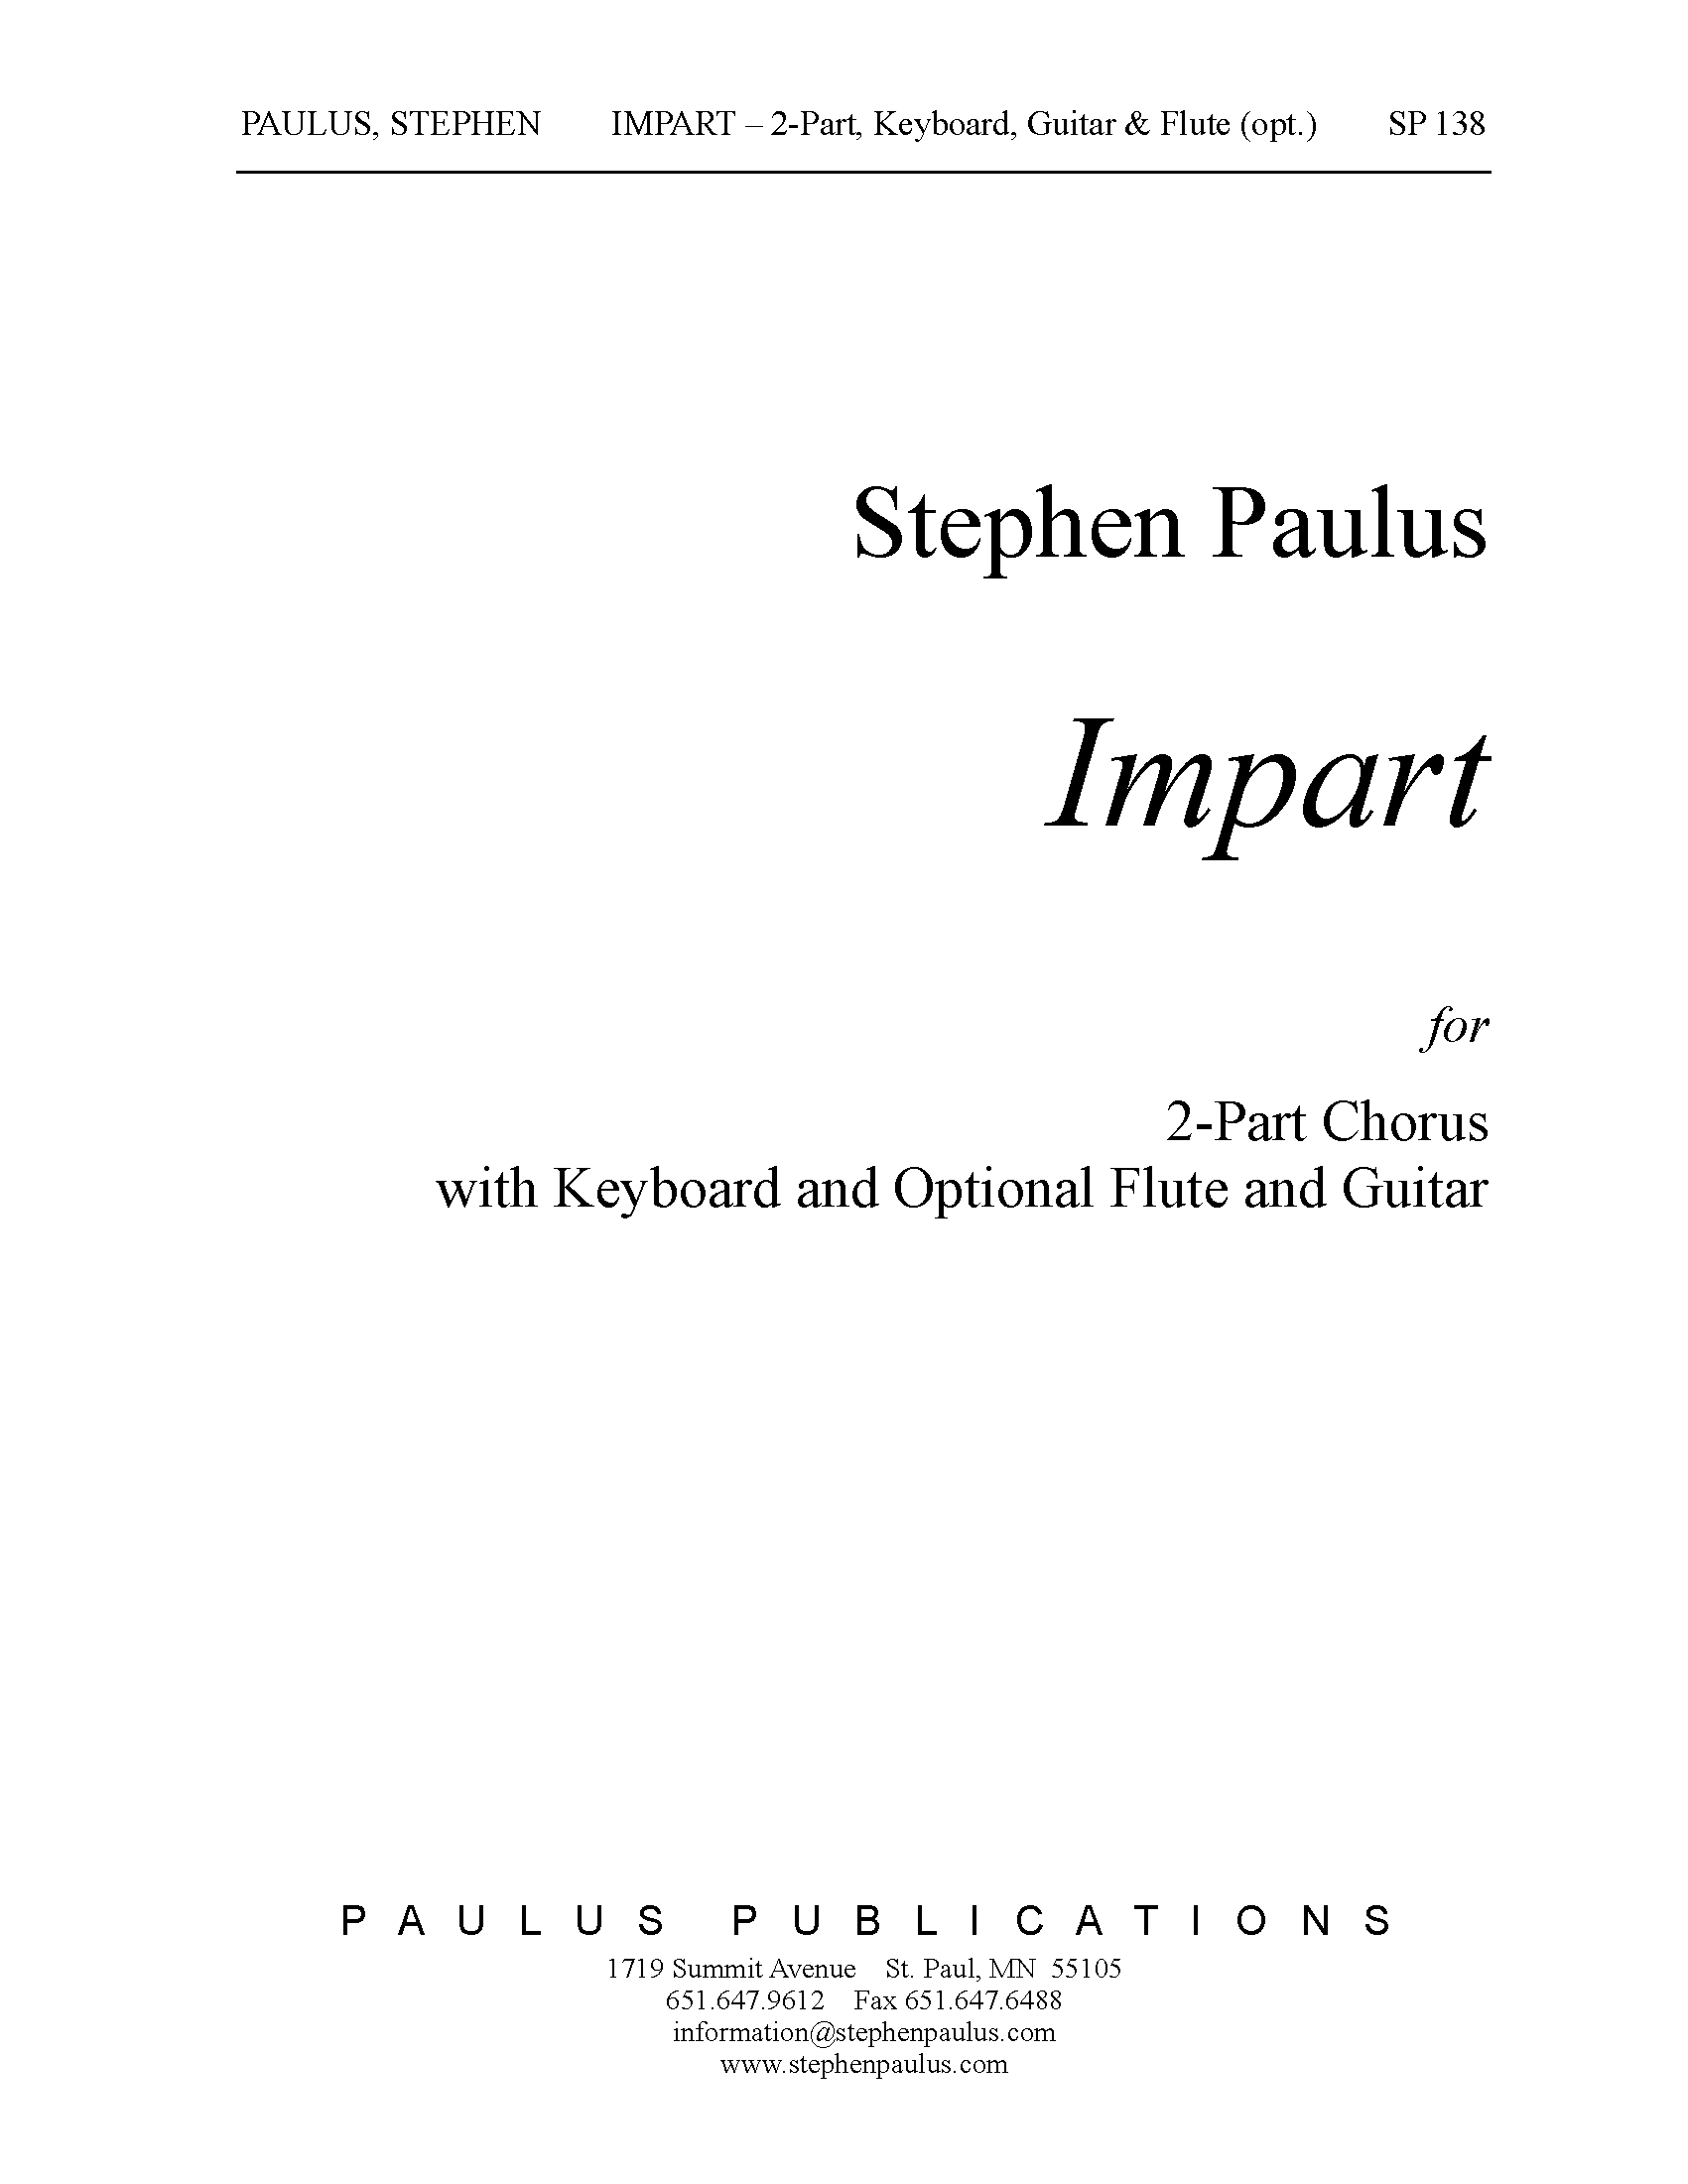 Impart for 2-Part Chorus & Keyboard (w/ opt. Flute)